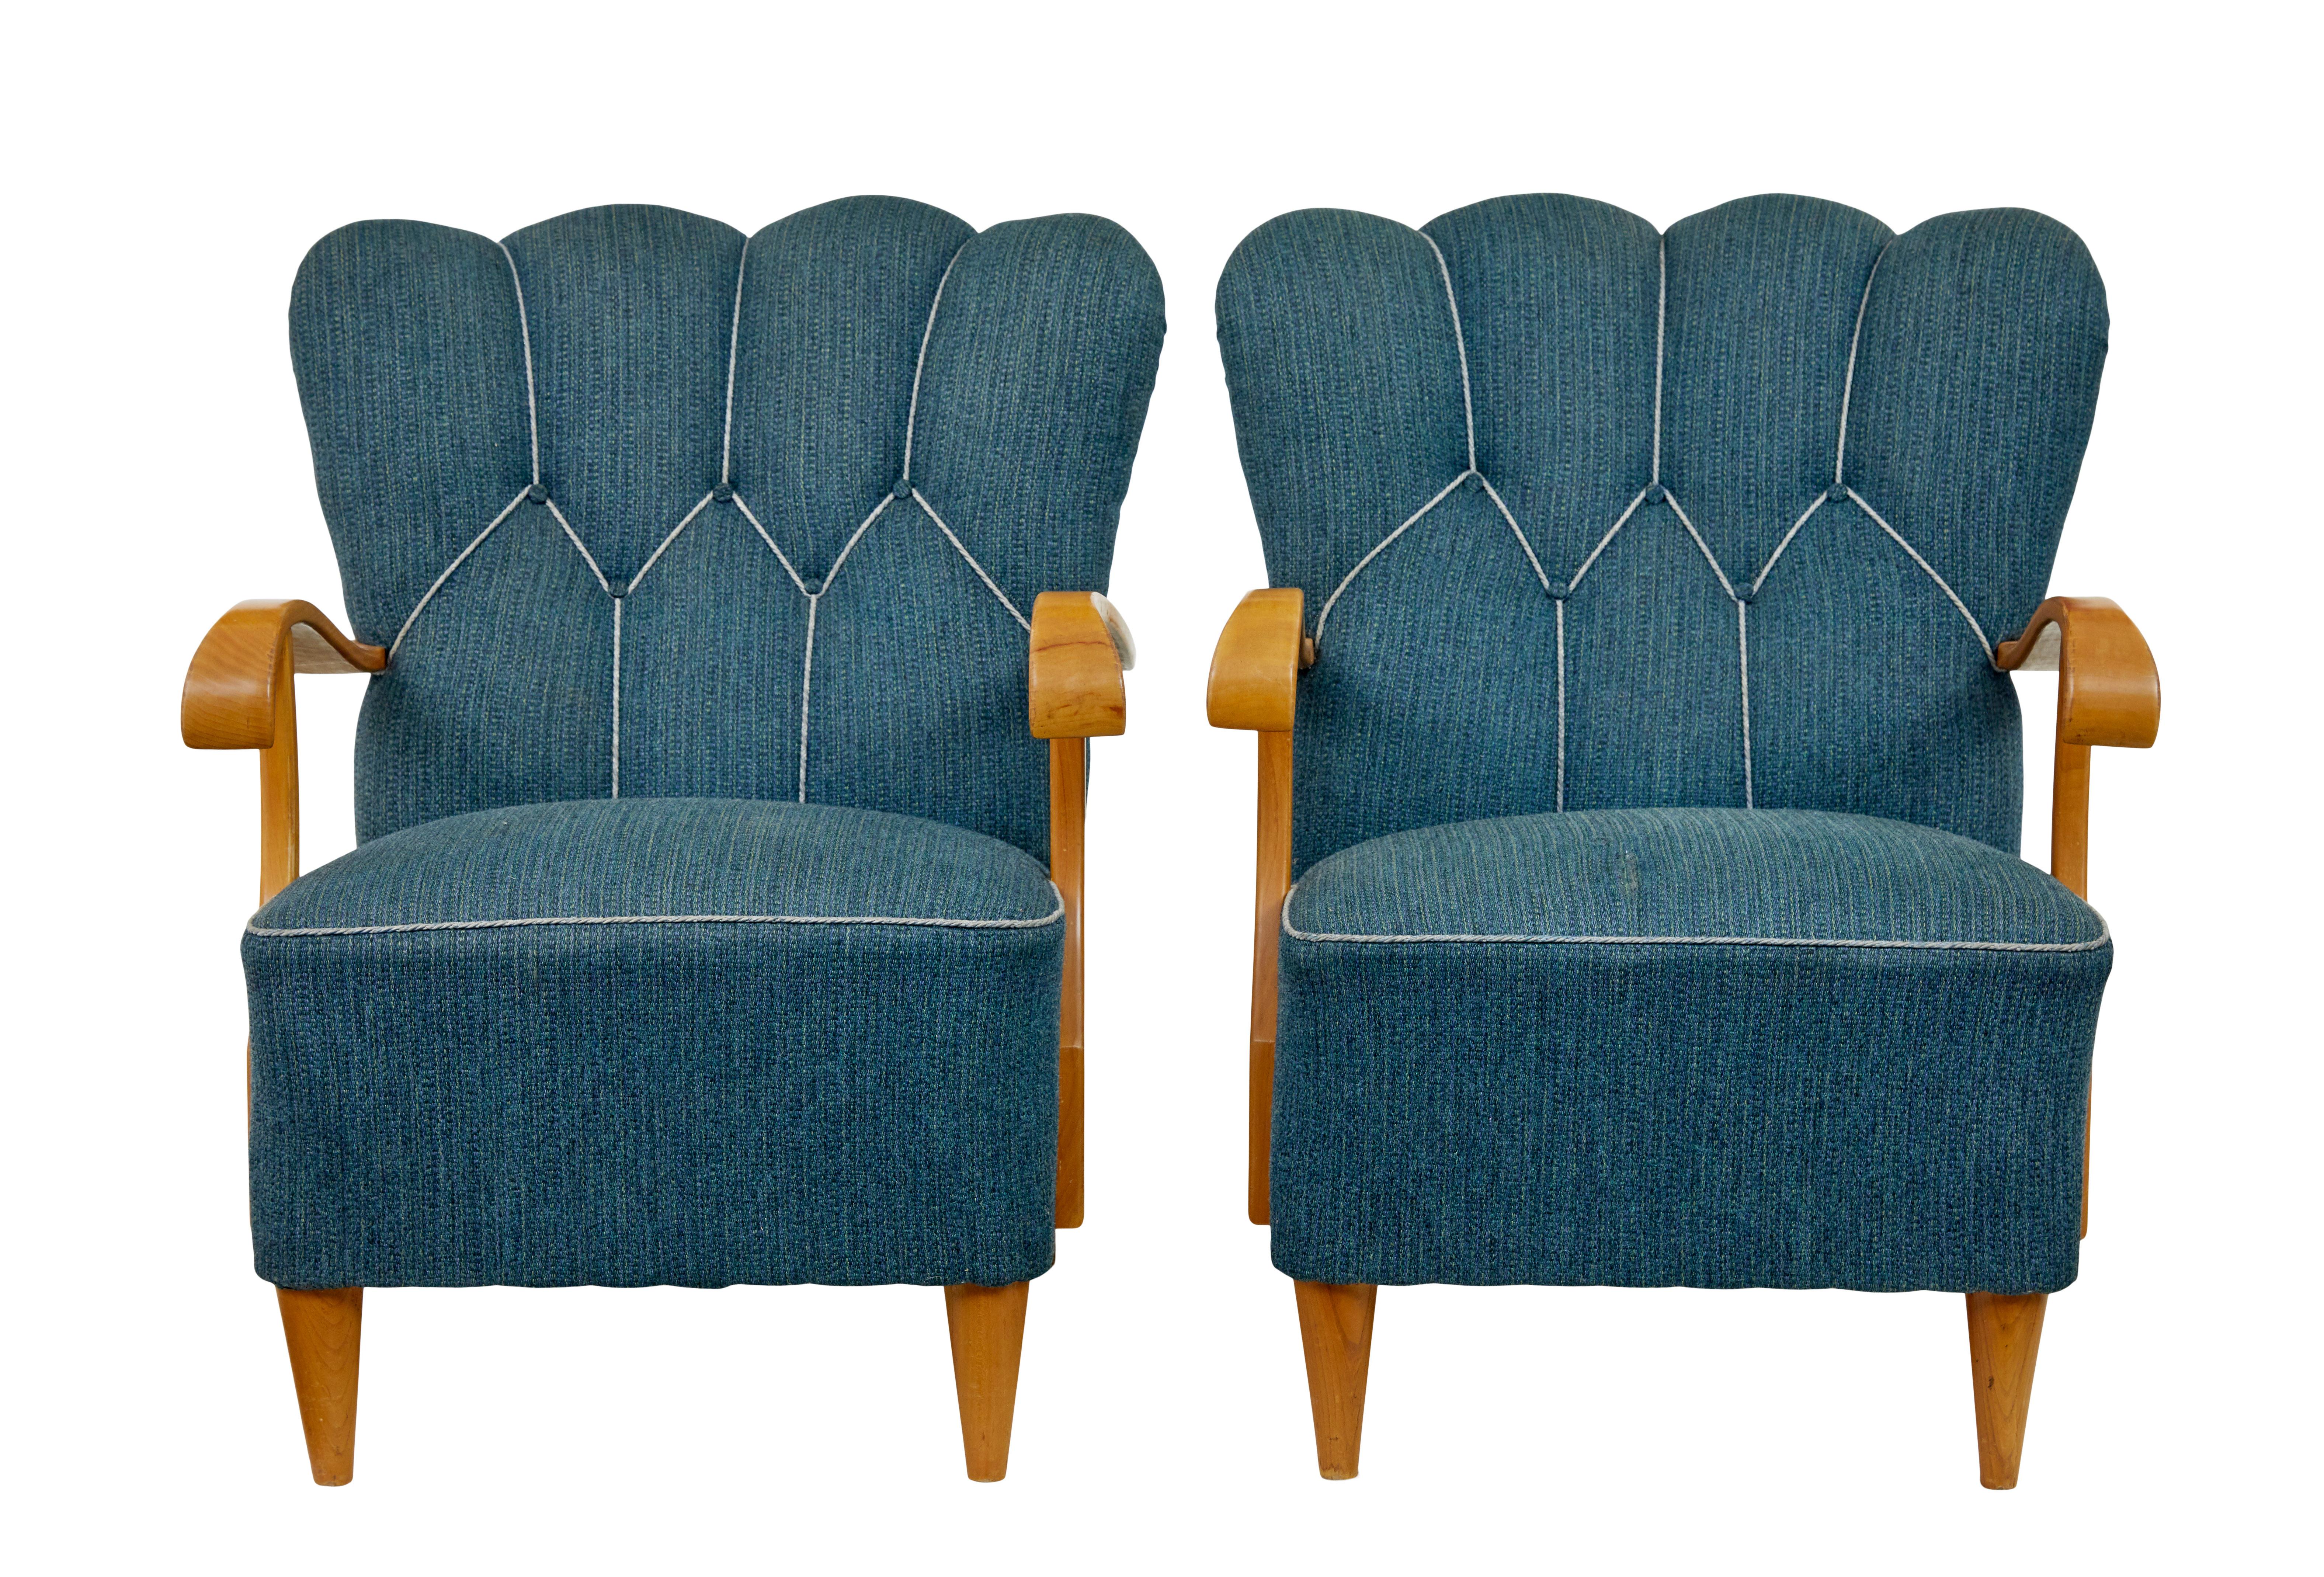 Good quality pair of Scandinavian designed armchairs circa 1950.

Shell shaped backs with contrasting piping.

Beech showframe exposed scrolling arms.  Standing on tapered legs.

Original upholstery with 1 repair to seat and some surface staining to